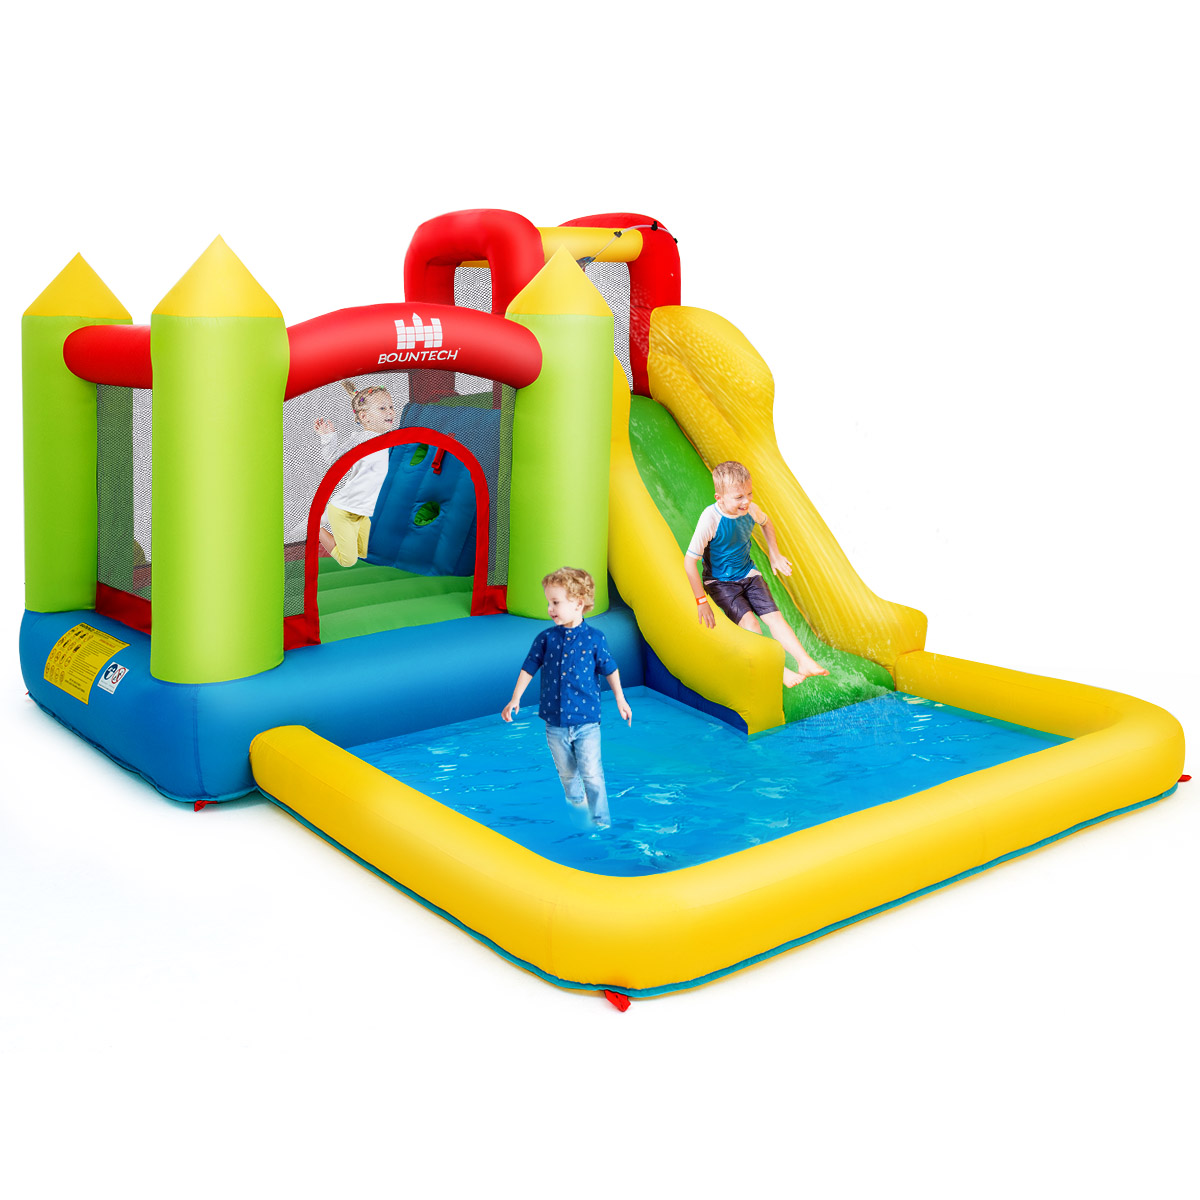 Costway Inflatable Bounce House Water Slide Jump Bouncer Climbing Wall Splash Pool Blower Excluded - image 1 of 10